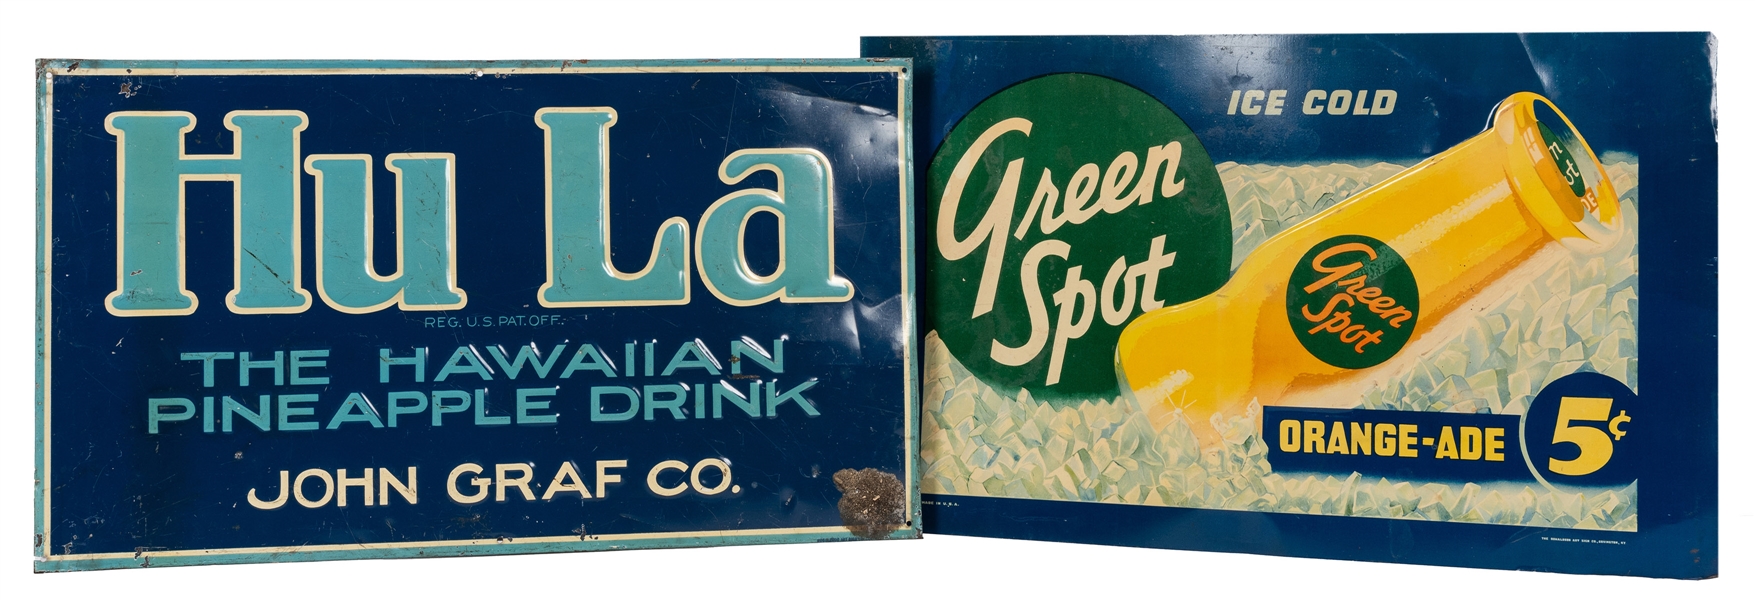 Hu La and Green Spot. Pair of Embossed Tin Signs for Fruit Beverages.